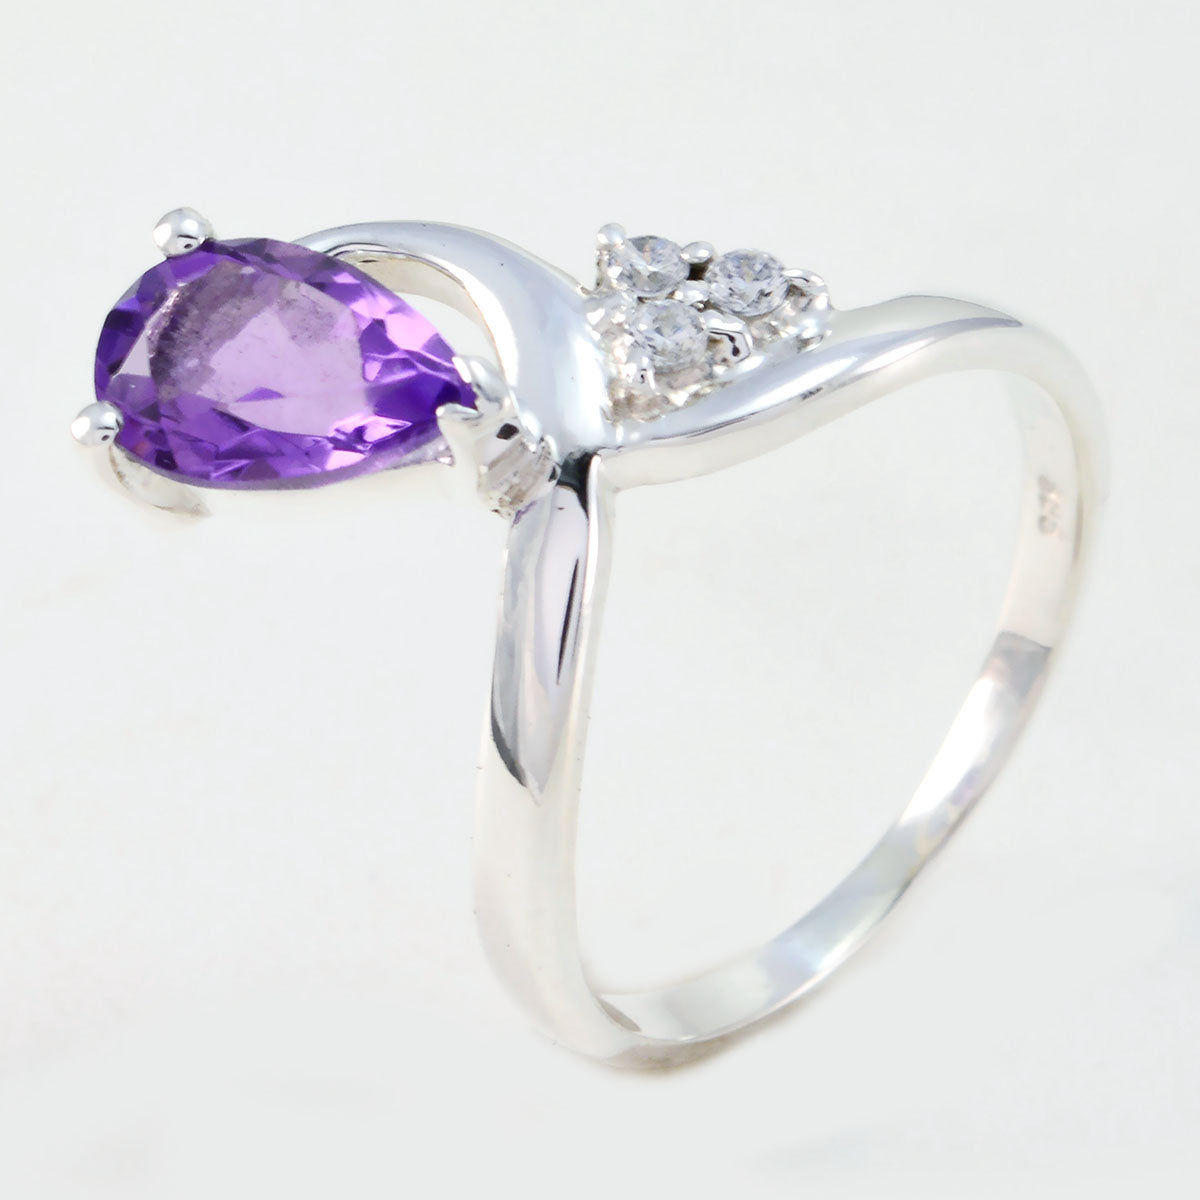 Supply Gems Amethyst Sterling Silver Ring Gift For Faishonable Day